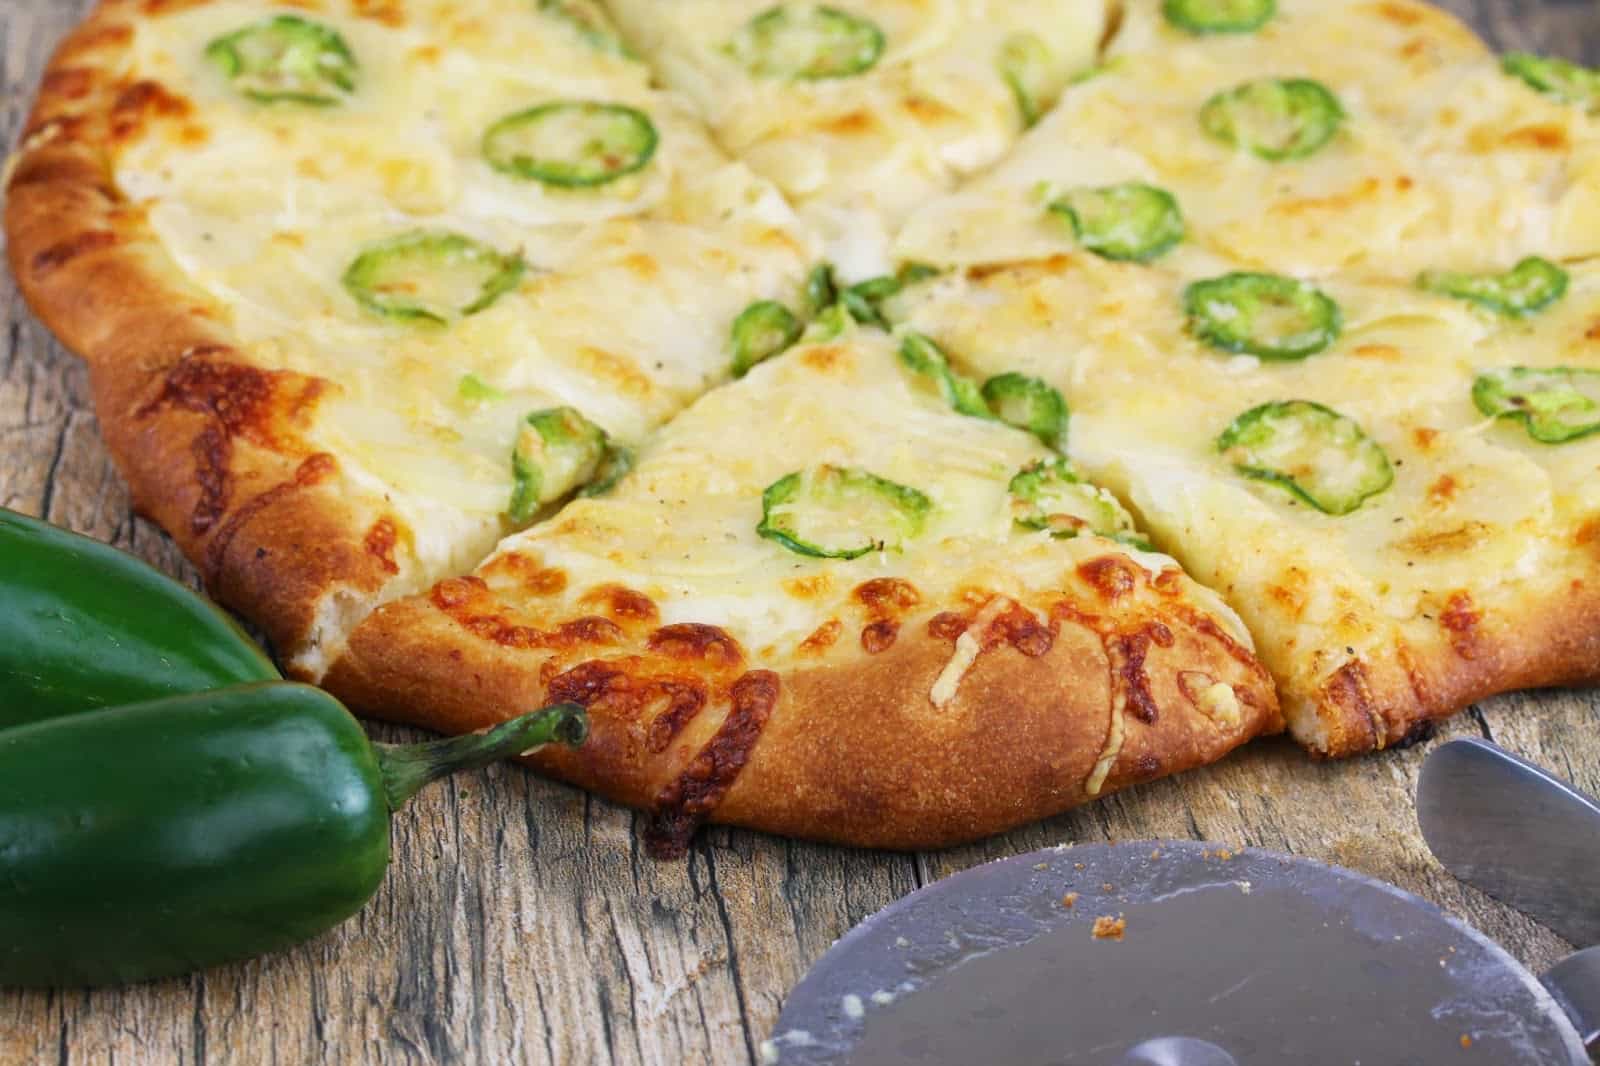 Jalapeno Scalloped Potato Pizza fresh out of the oven, cut into slices with a pizza cutter